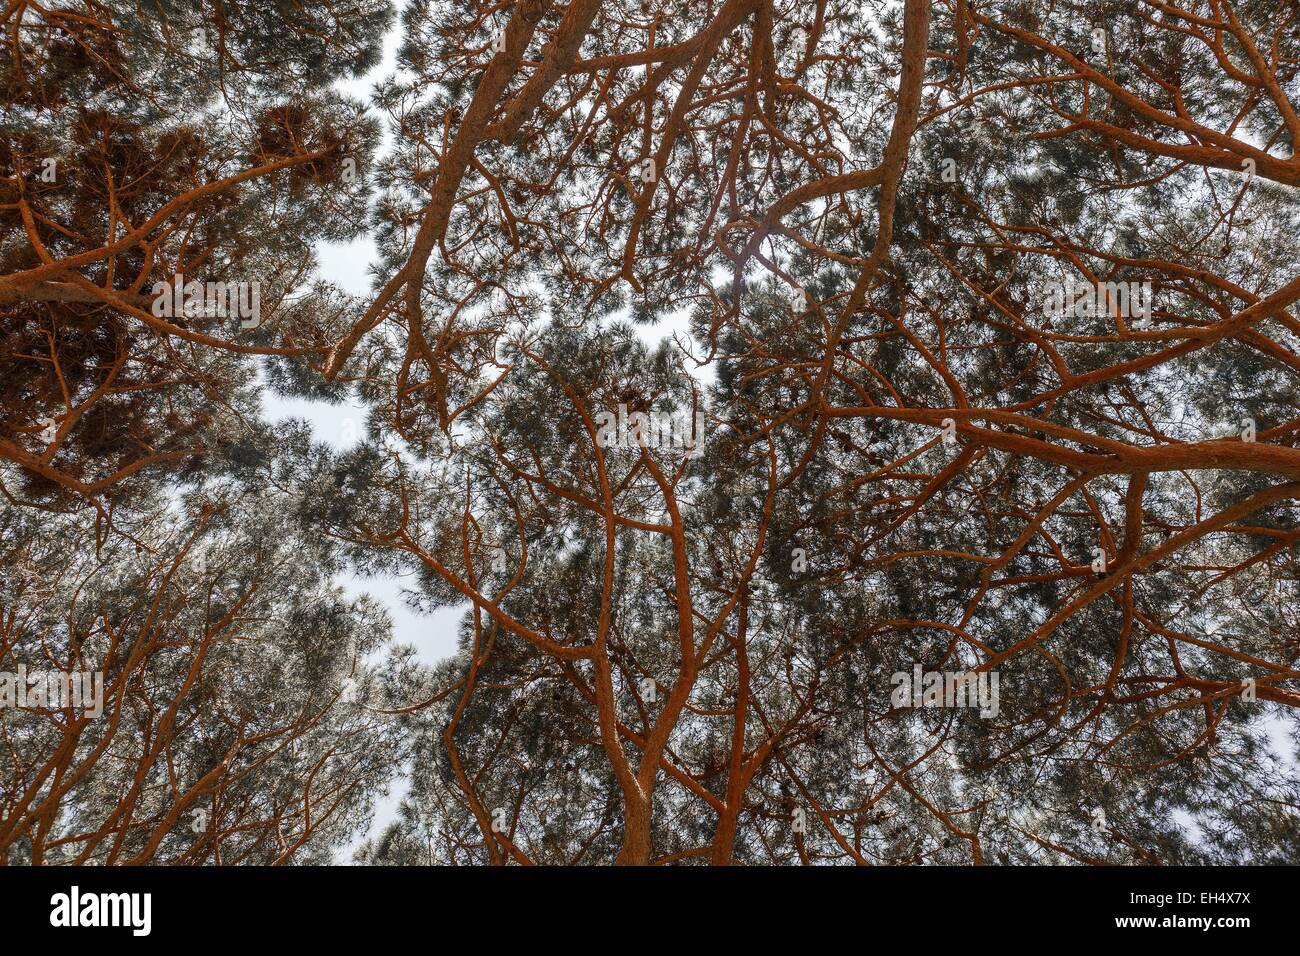 France, Alpes Maritimes, Valbonne, view zenith branches of a pine Stock Photo